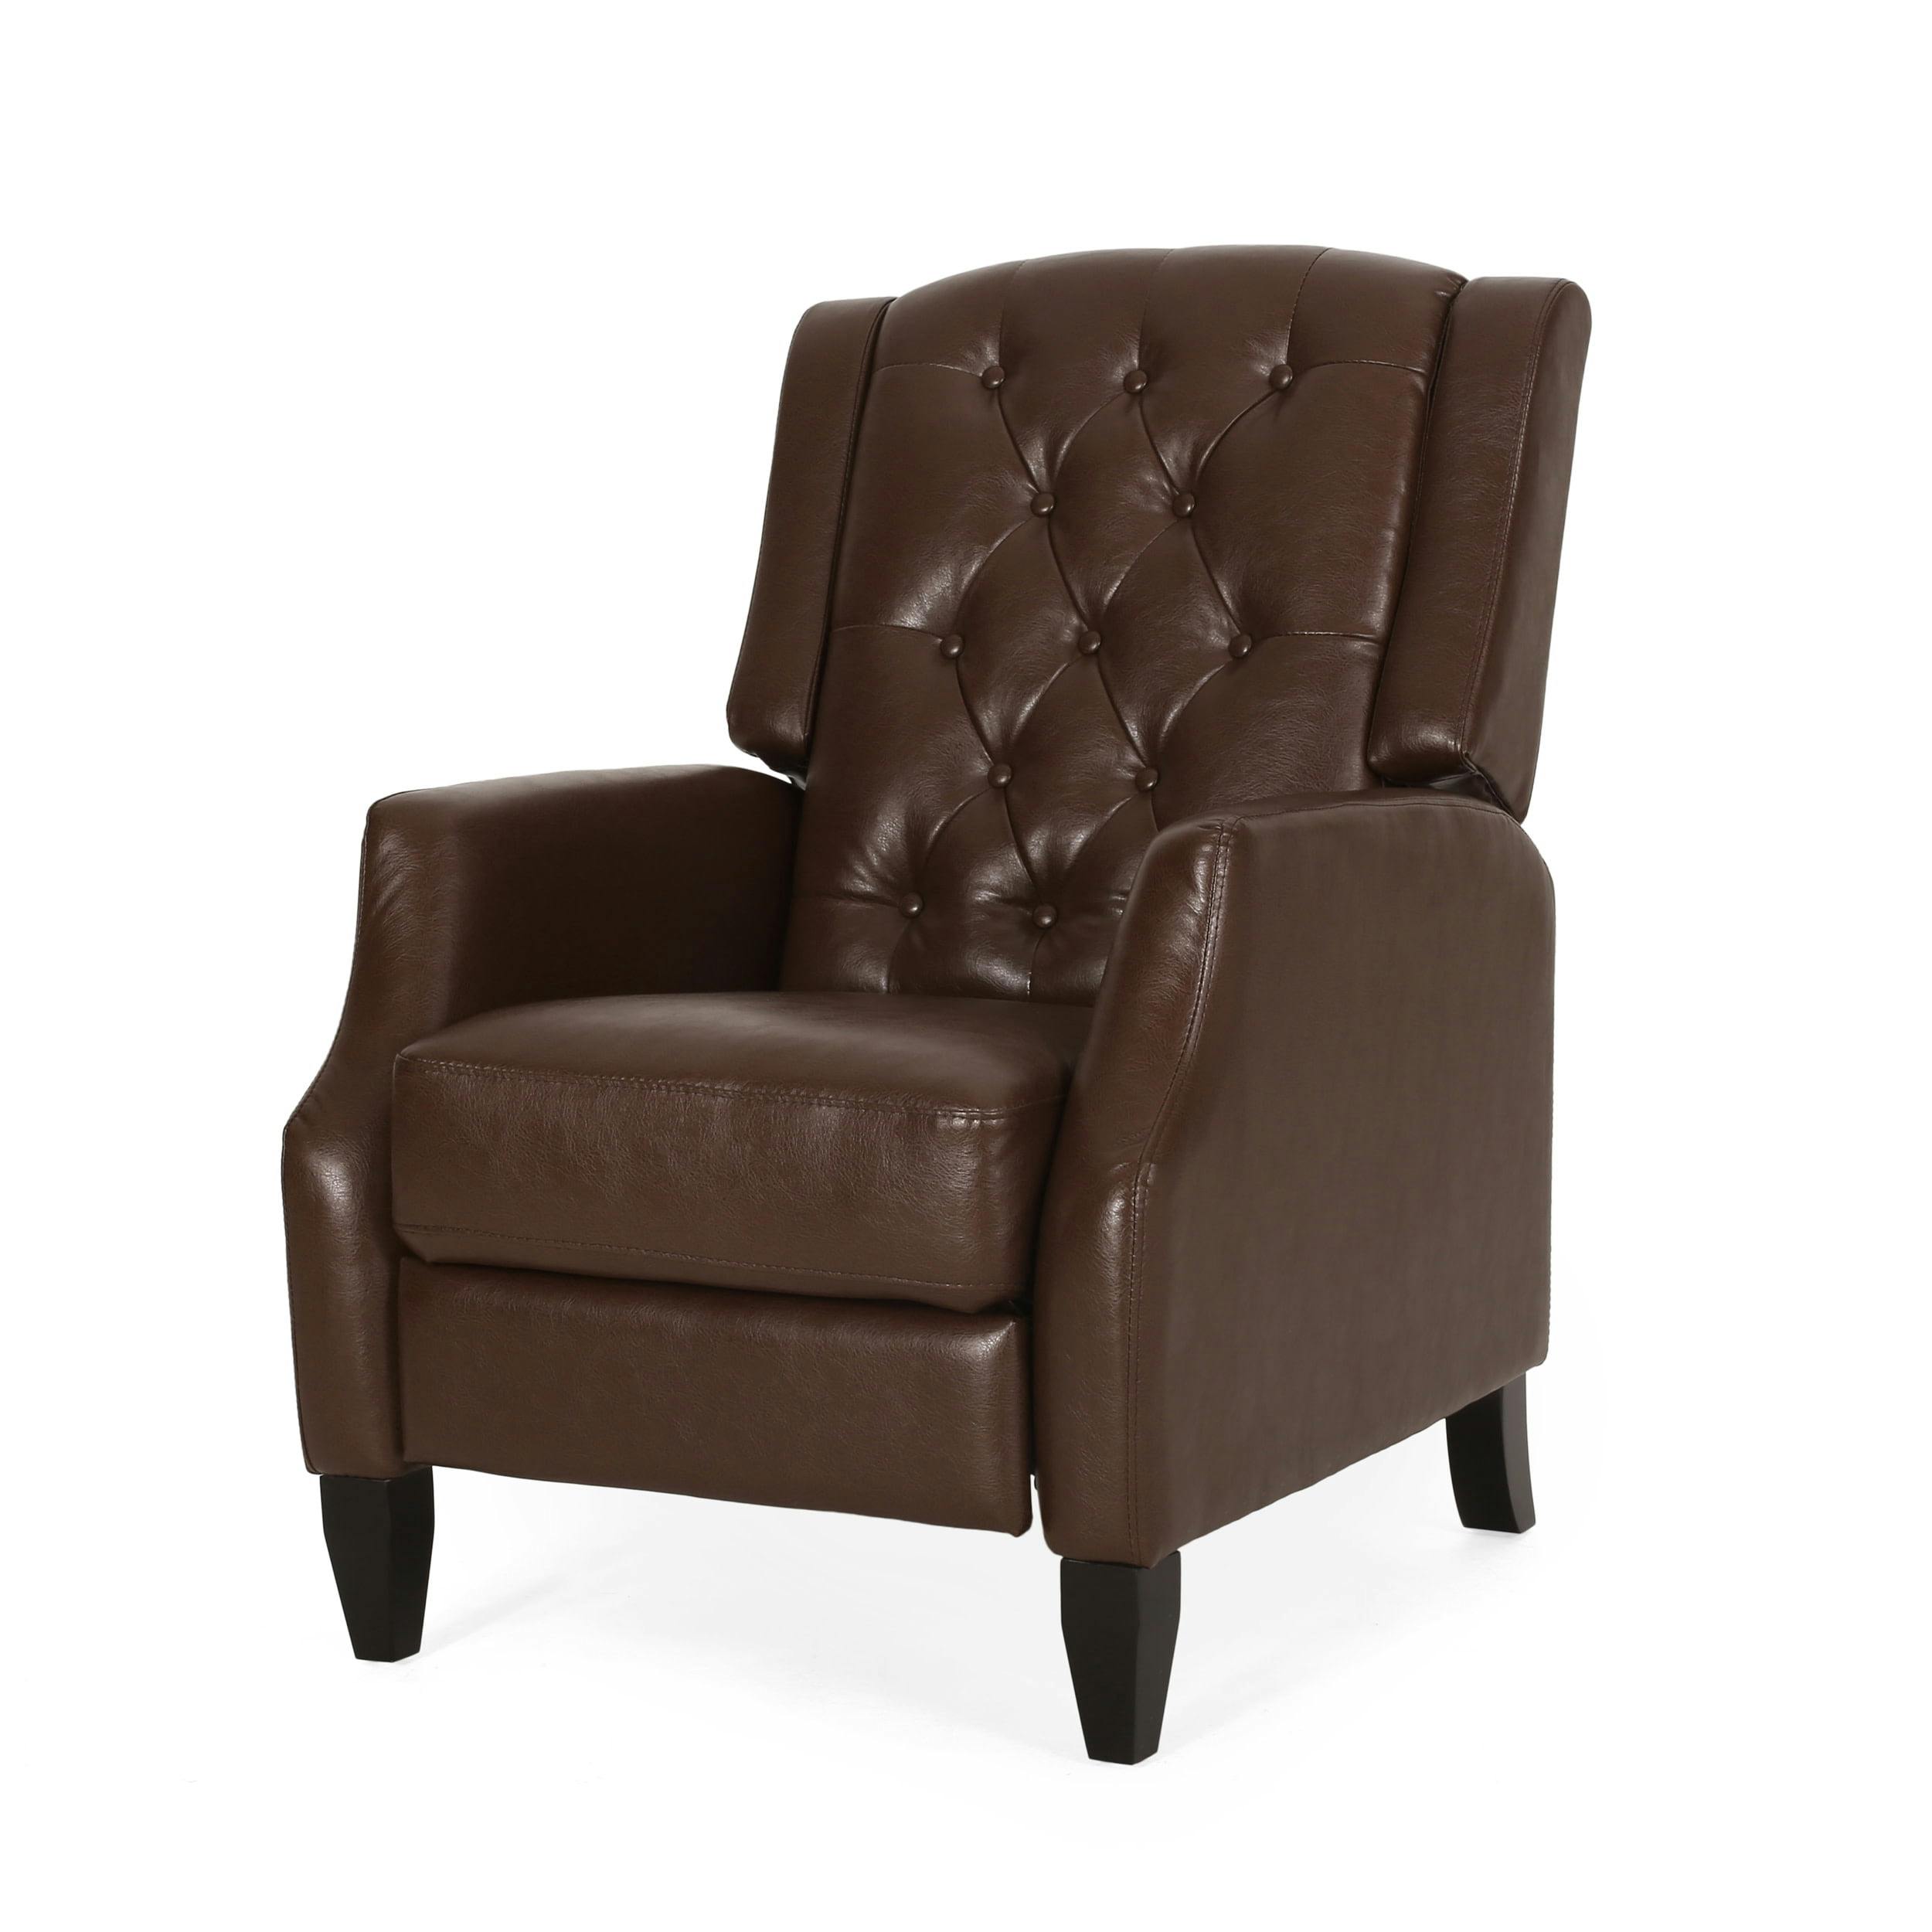 Chic Dark Brown Faux Leather Push-Back Club Recliner